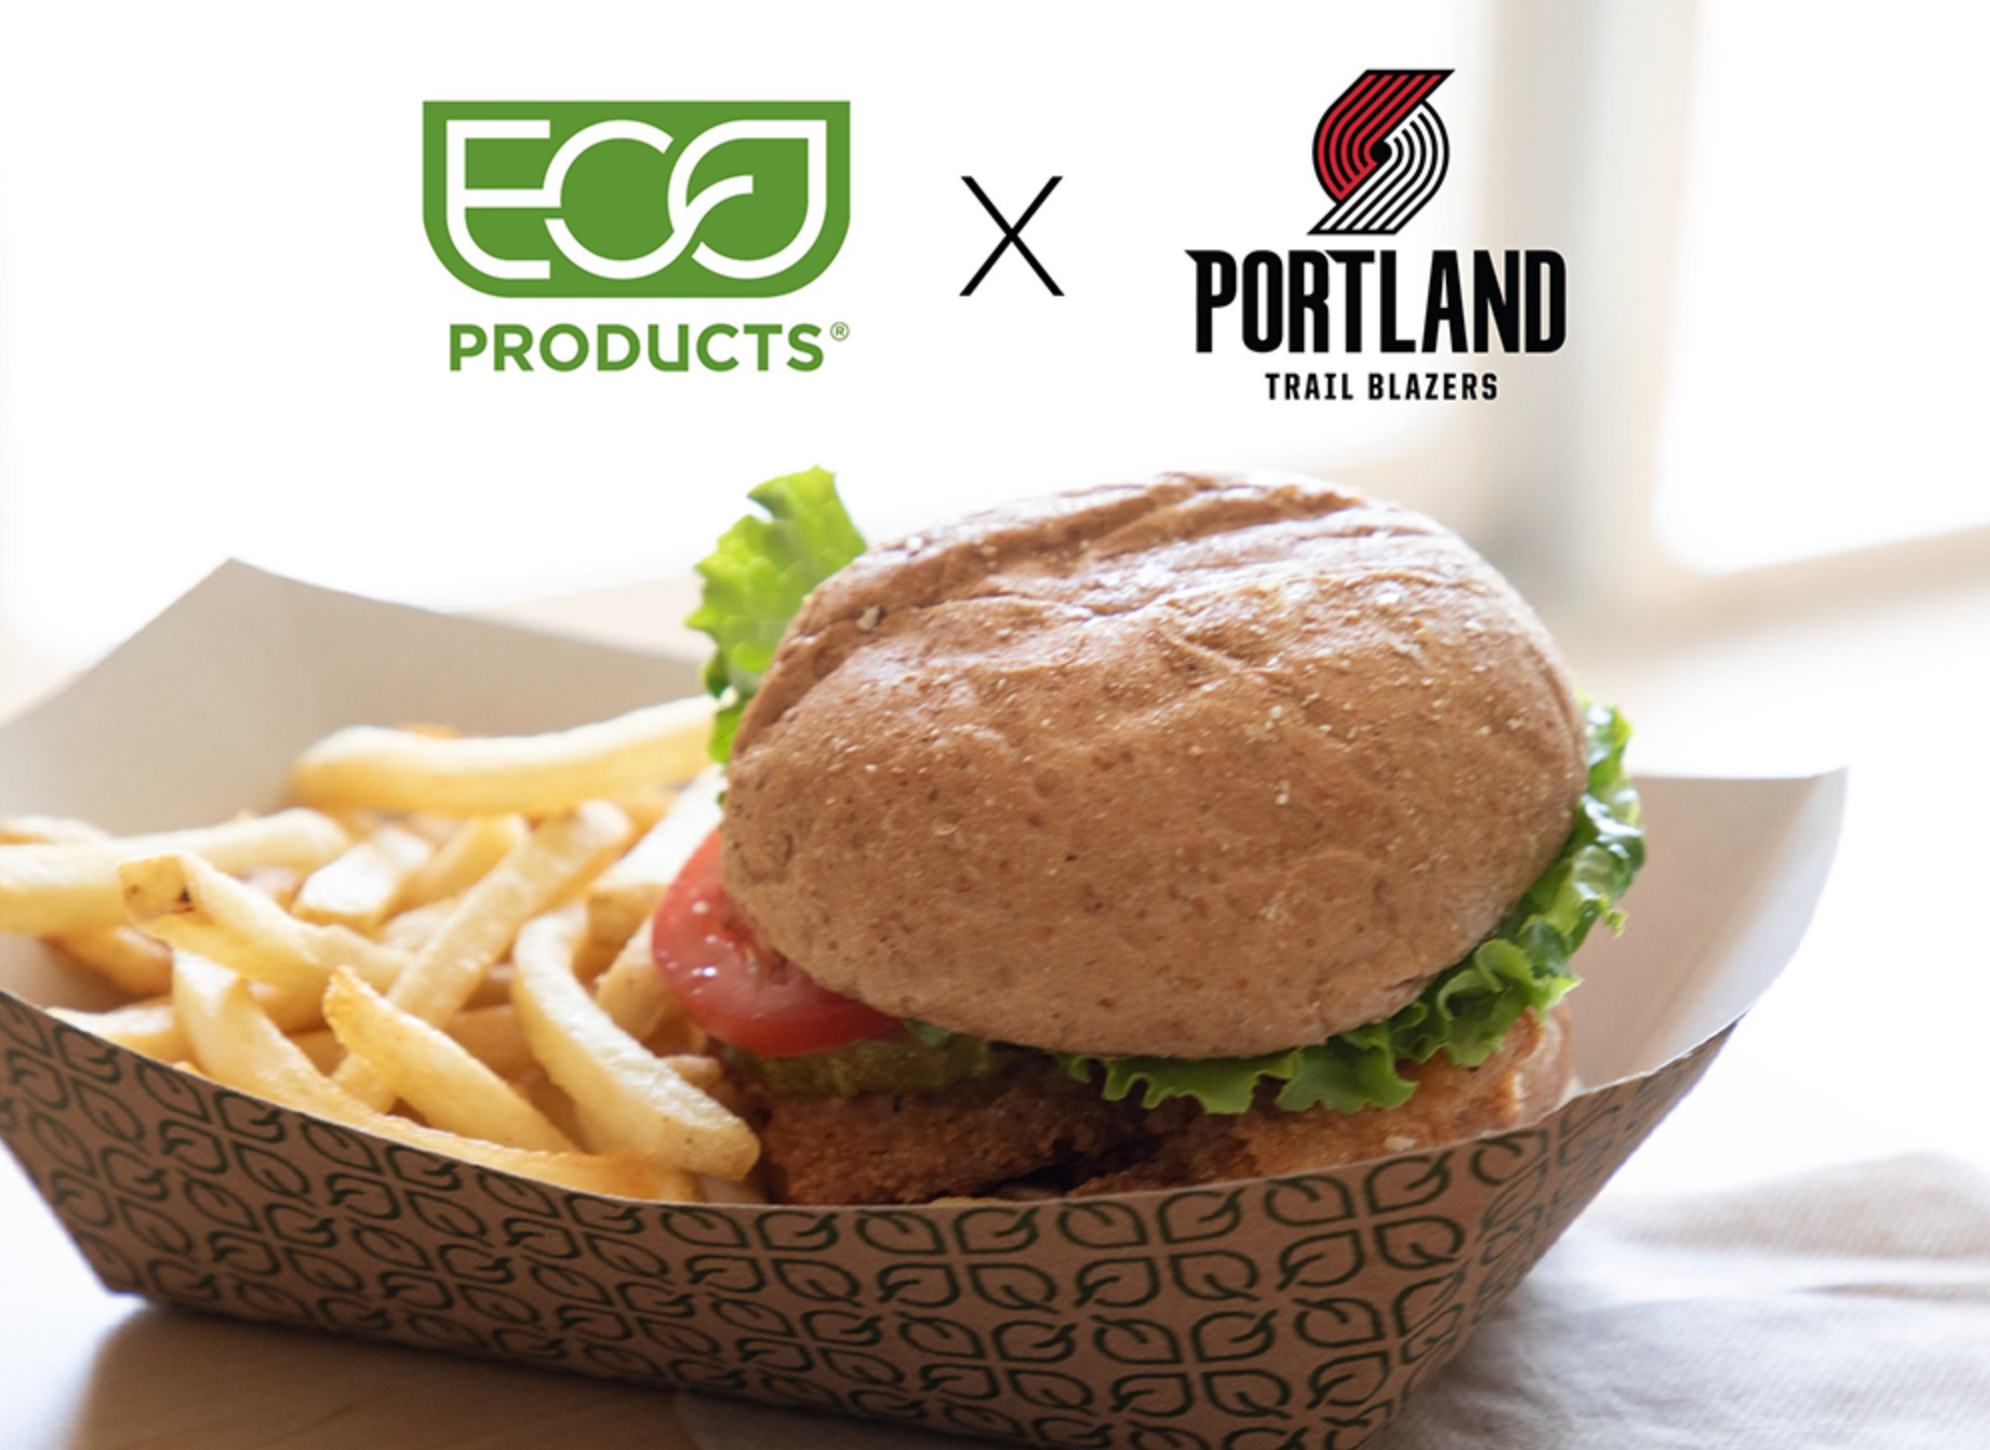 https://packagingsuppliersglobal.com/assets/uploads/Portland-Trail-Blazers-announce-Eco-Products-as-an-official-zero-waste-partner.png